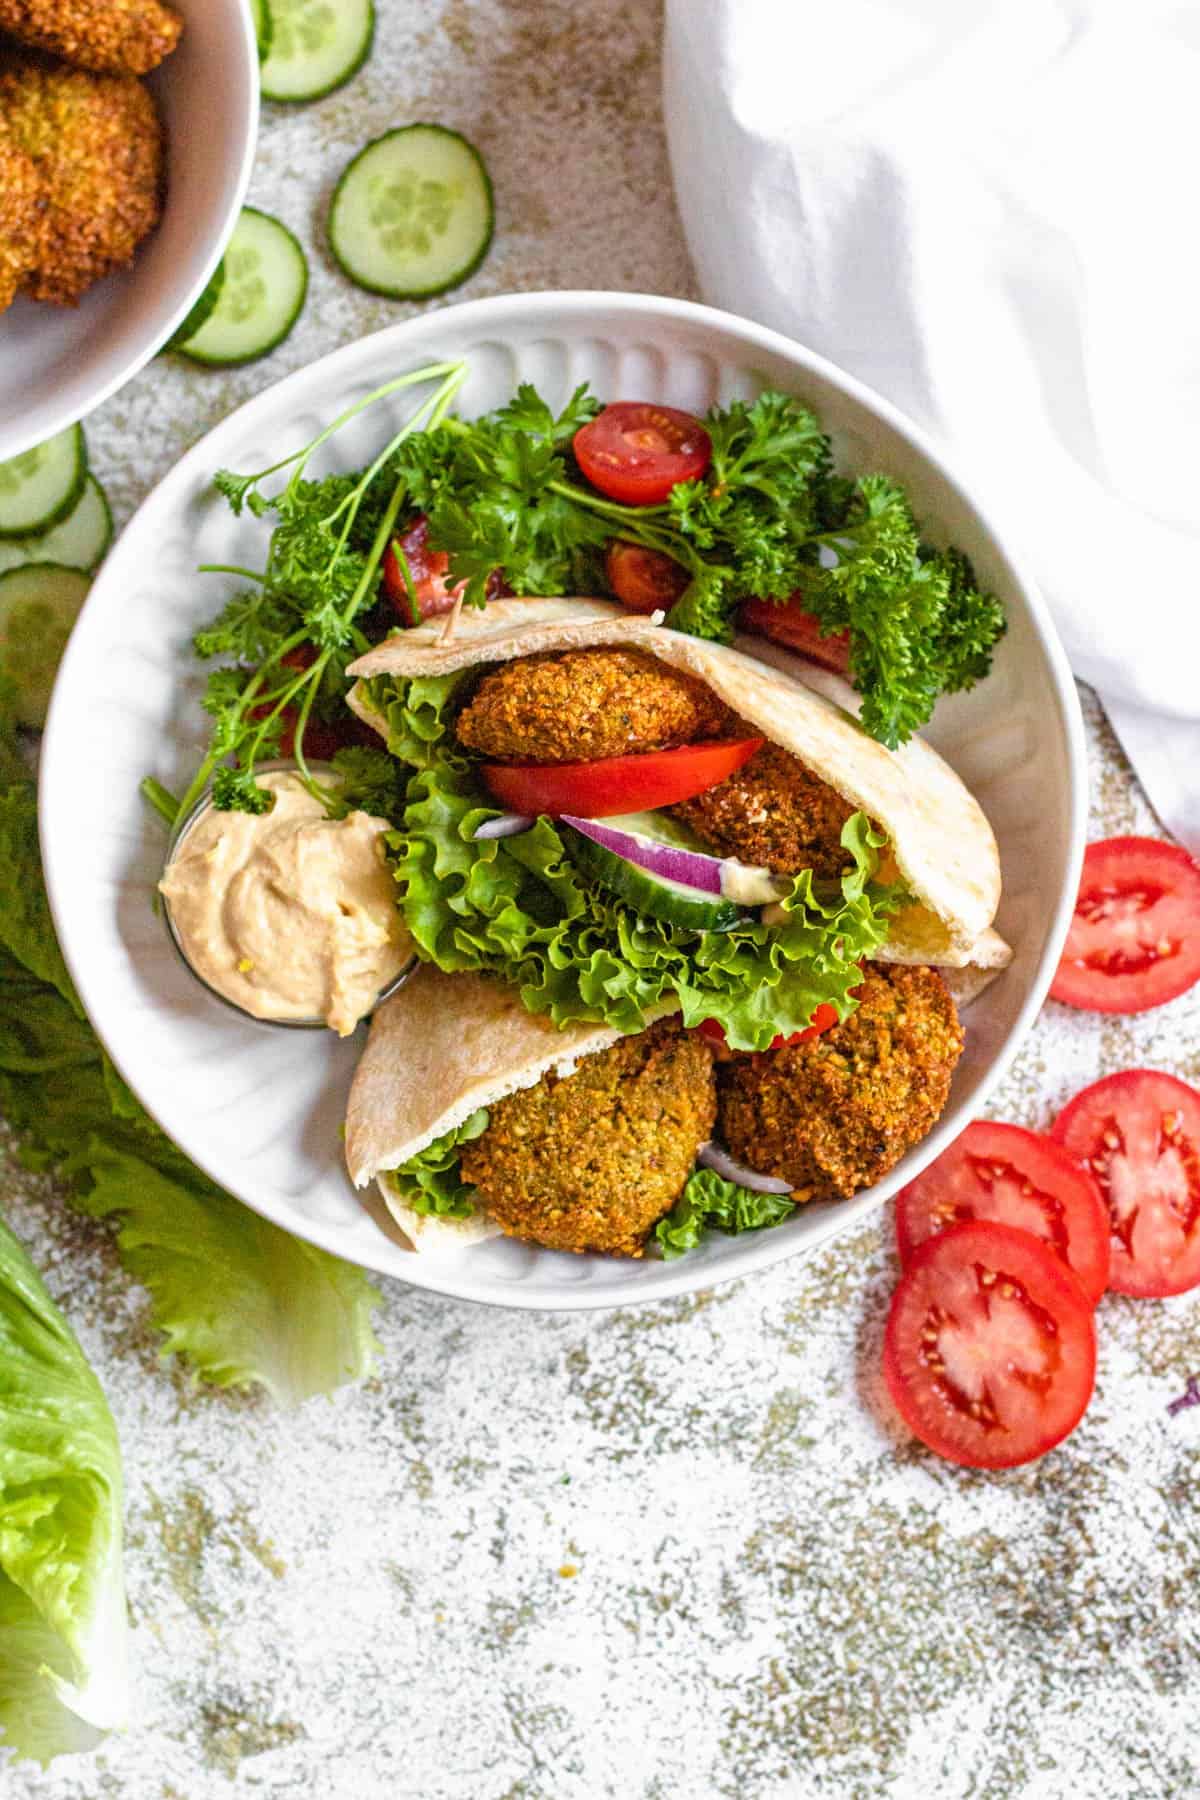 Falafel pitas served in a bowl with garnish of parsley, cherry tomatoes and hummus on the side. 